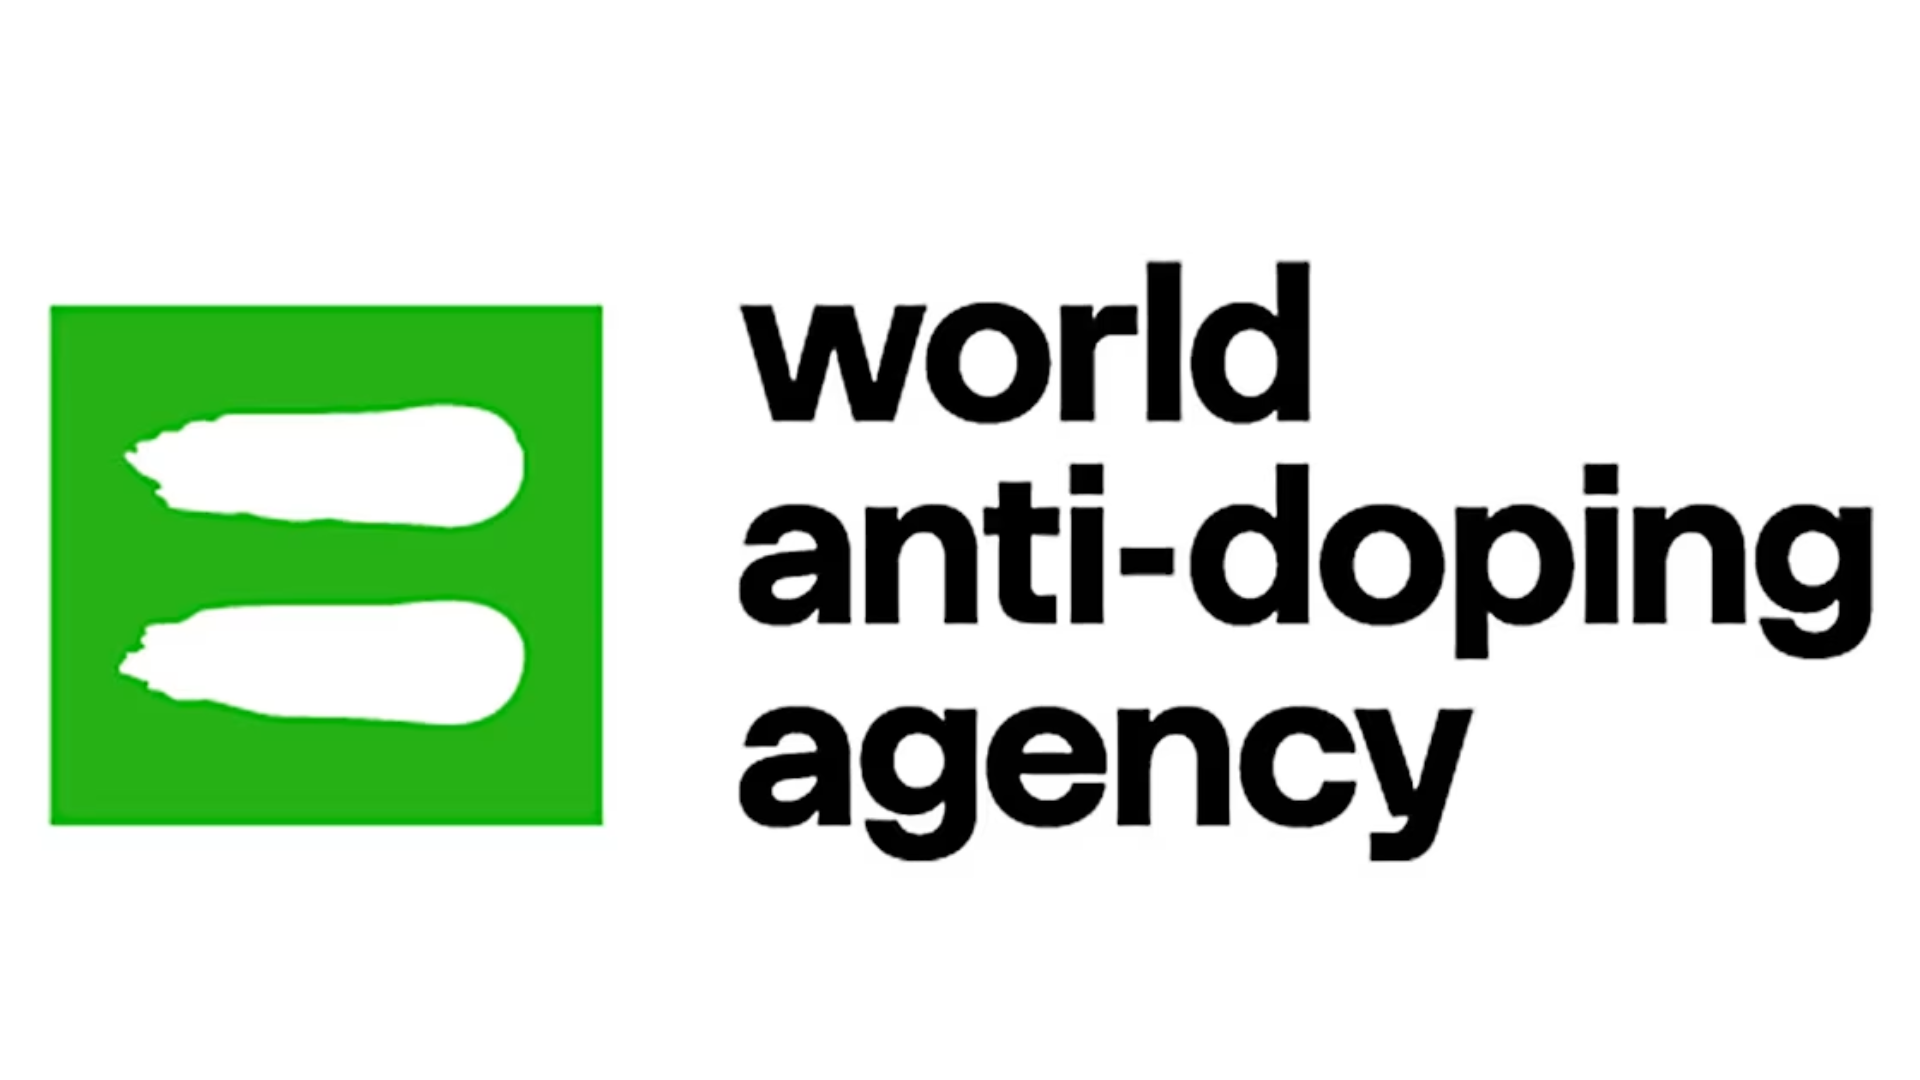 World Anti-Doping Agency Challenges US Anti-Doping Body, Threatening Future Olympic Hosting